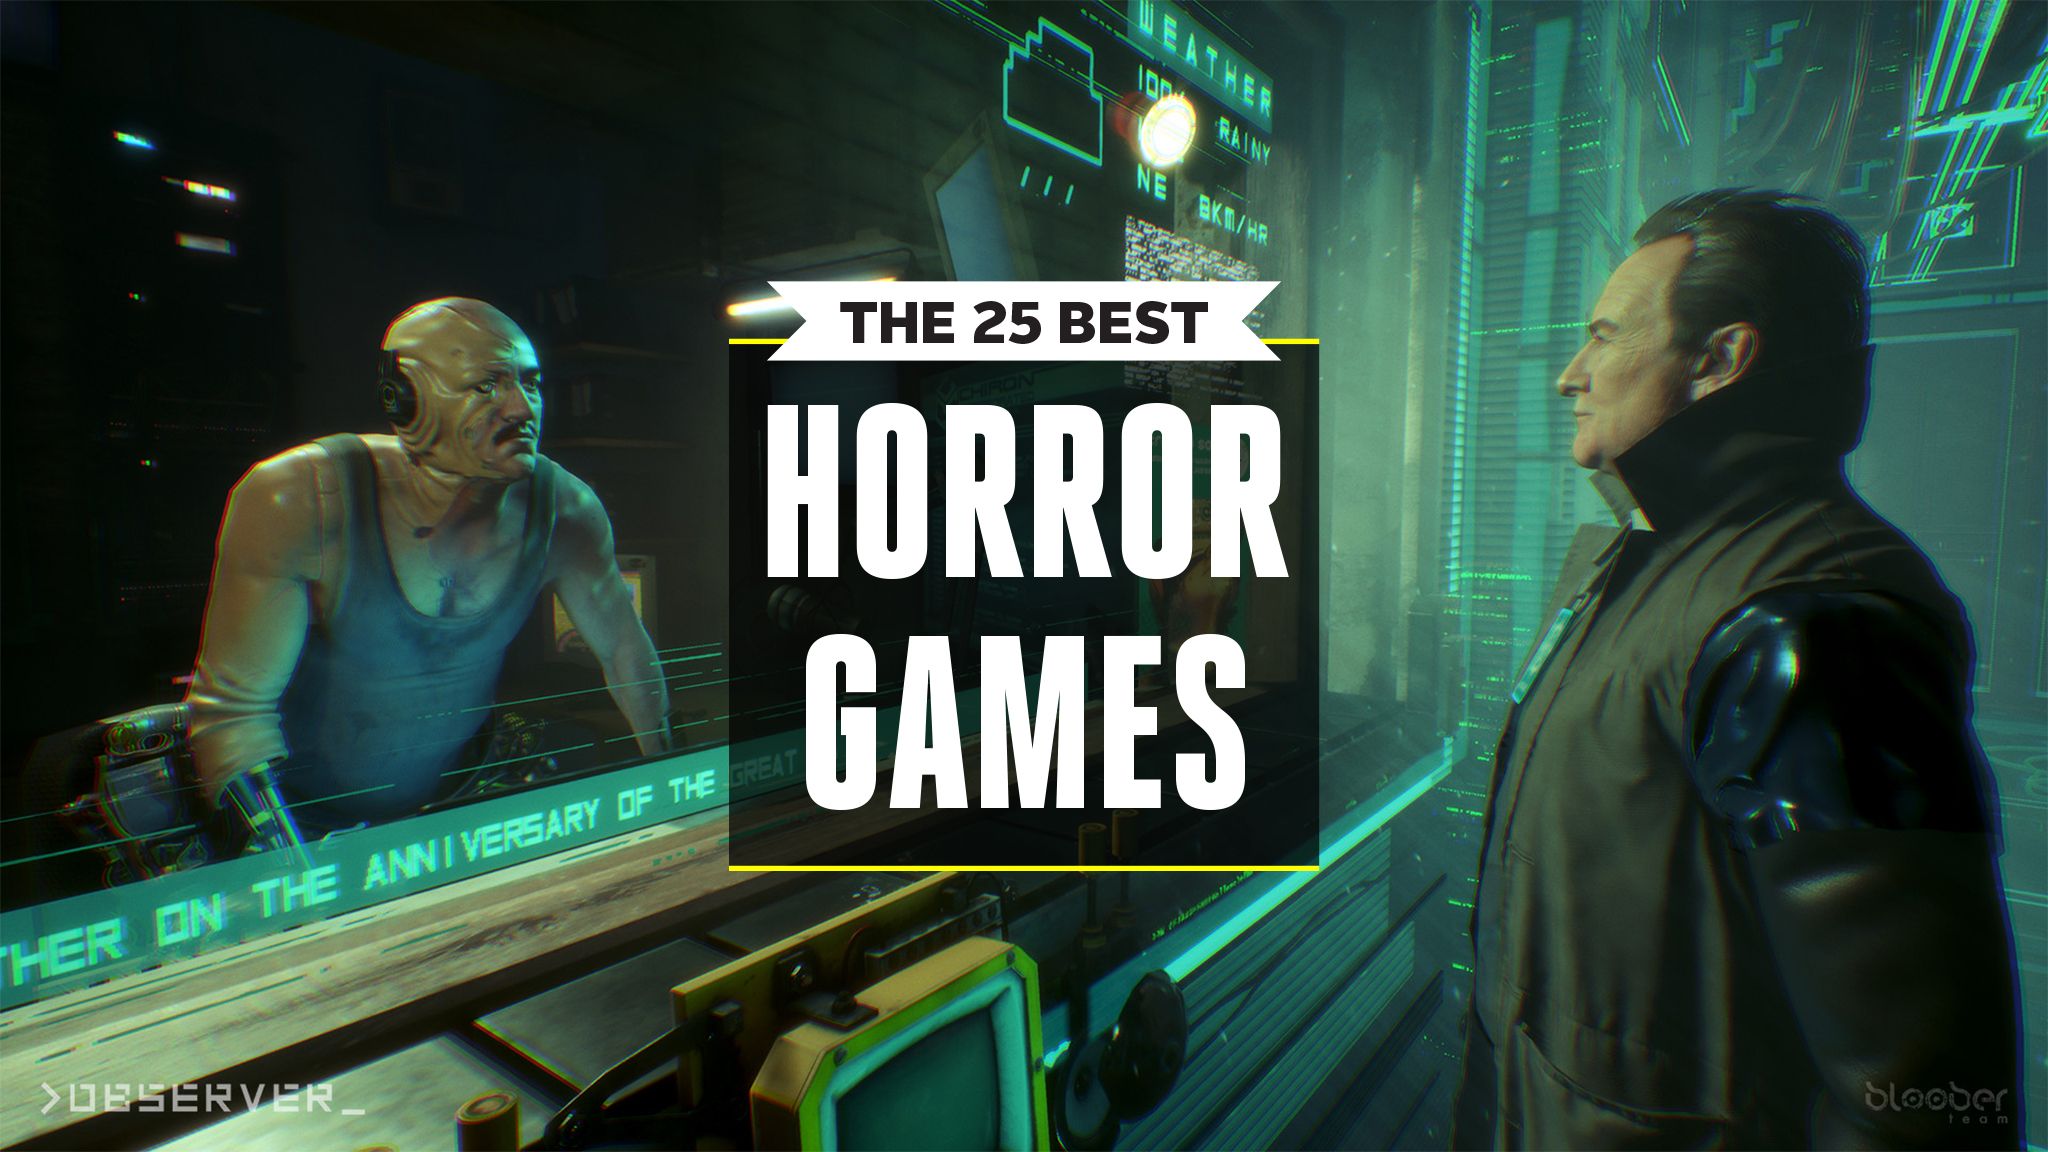 The 25 best horror games on PC